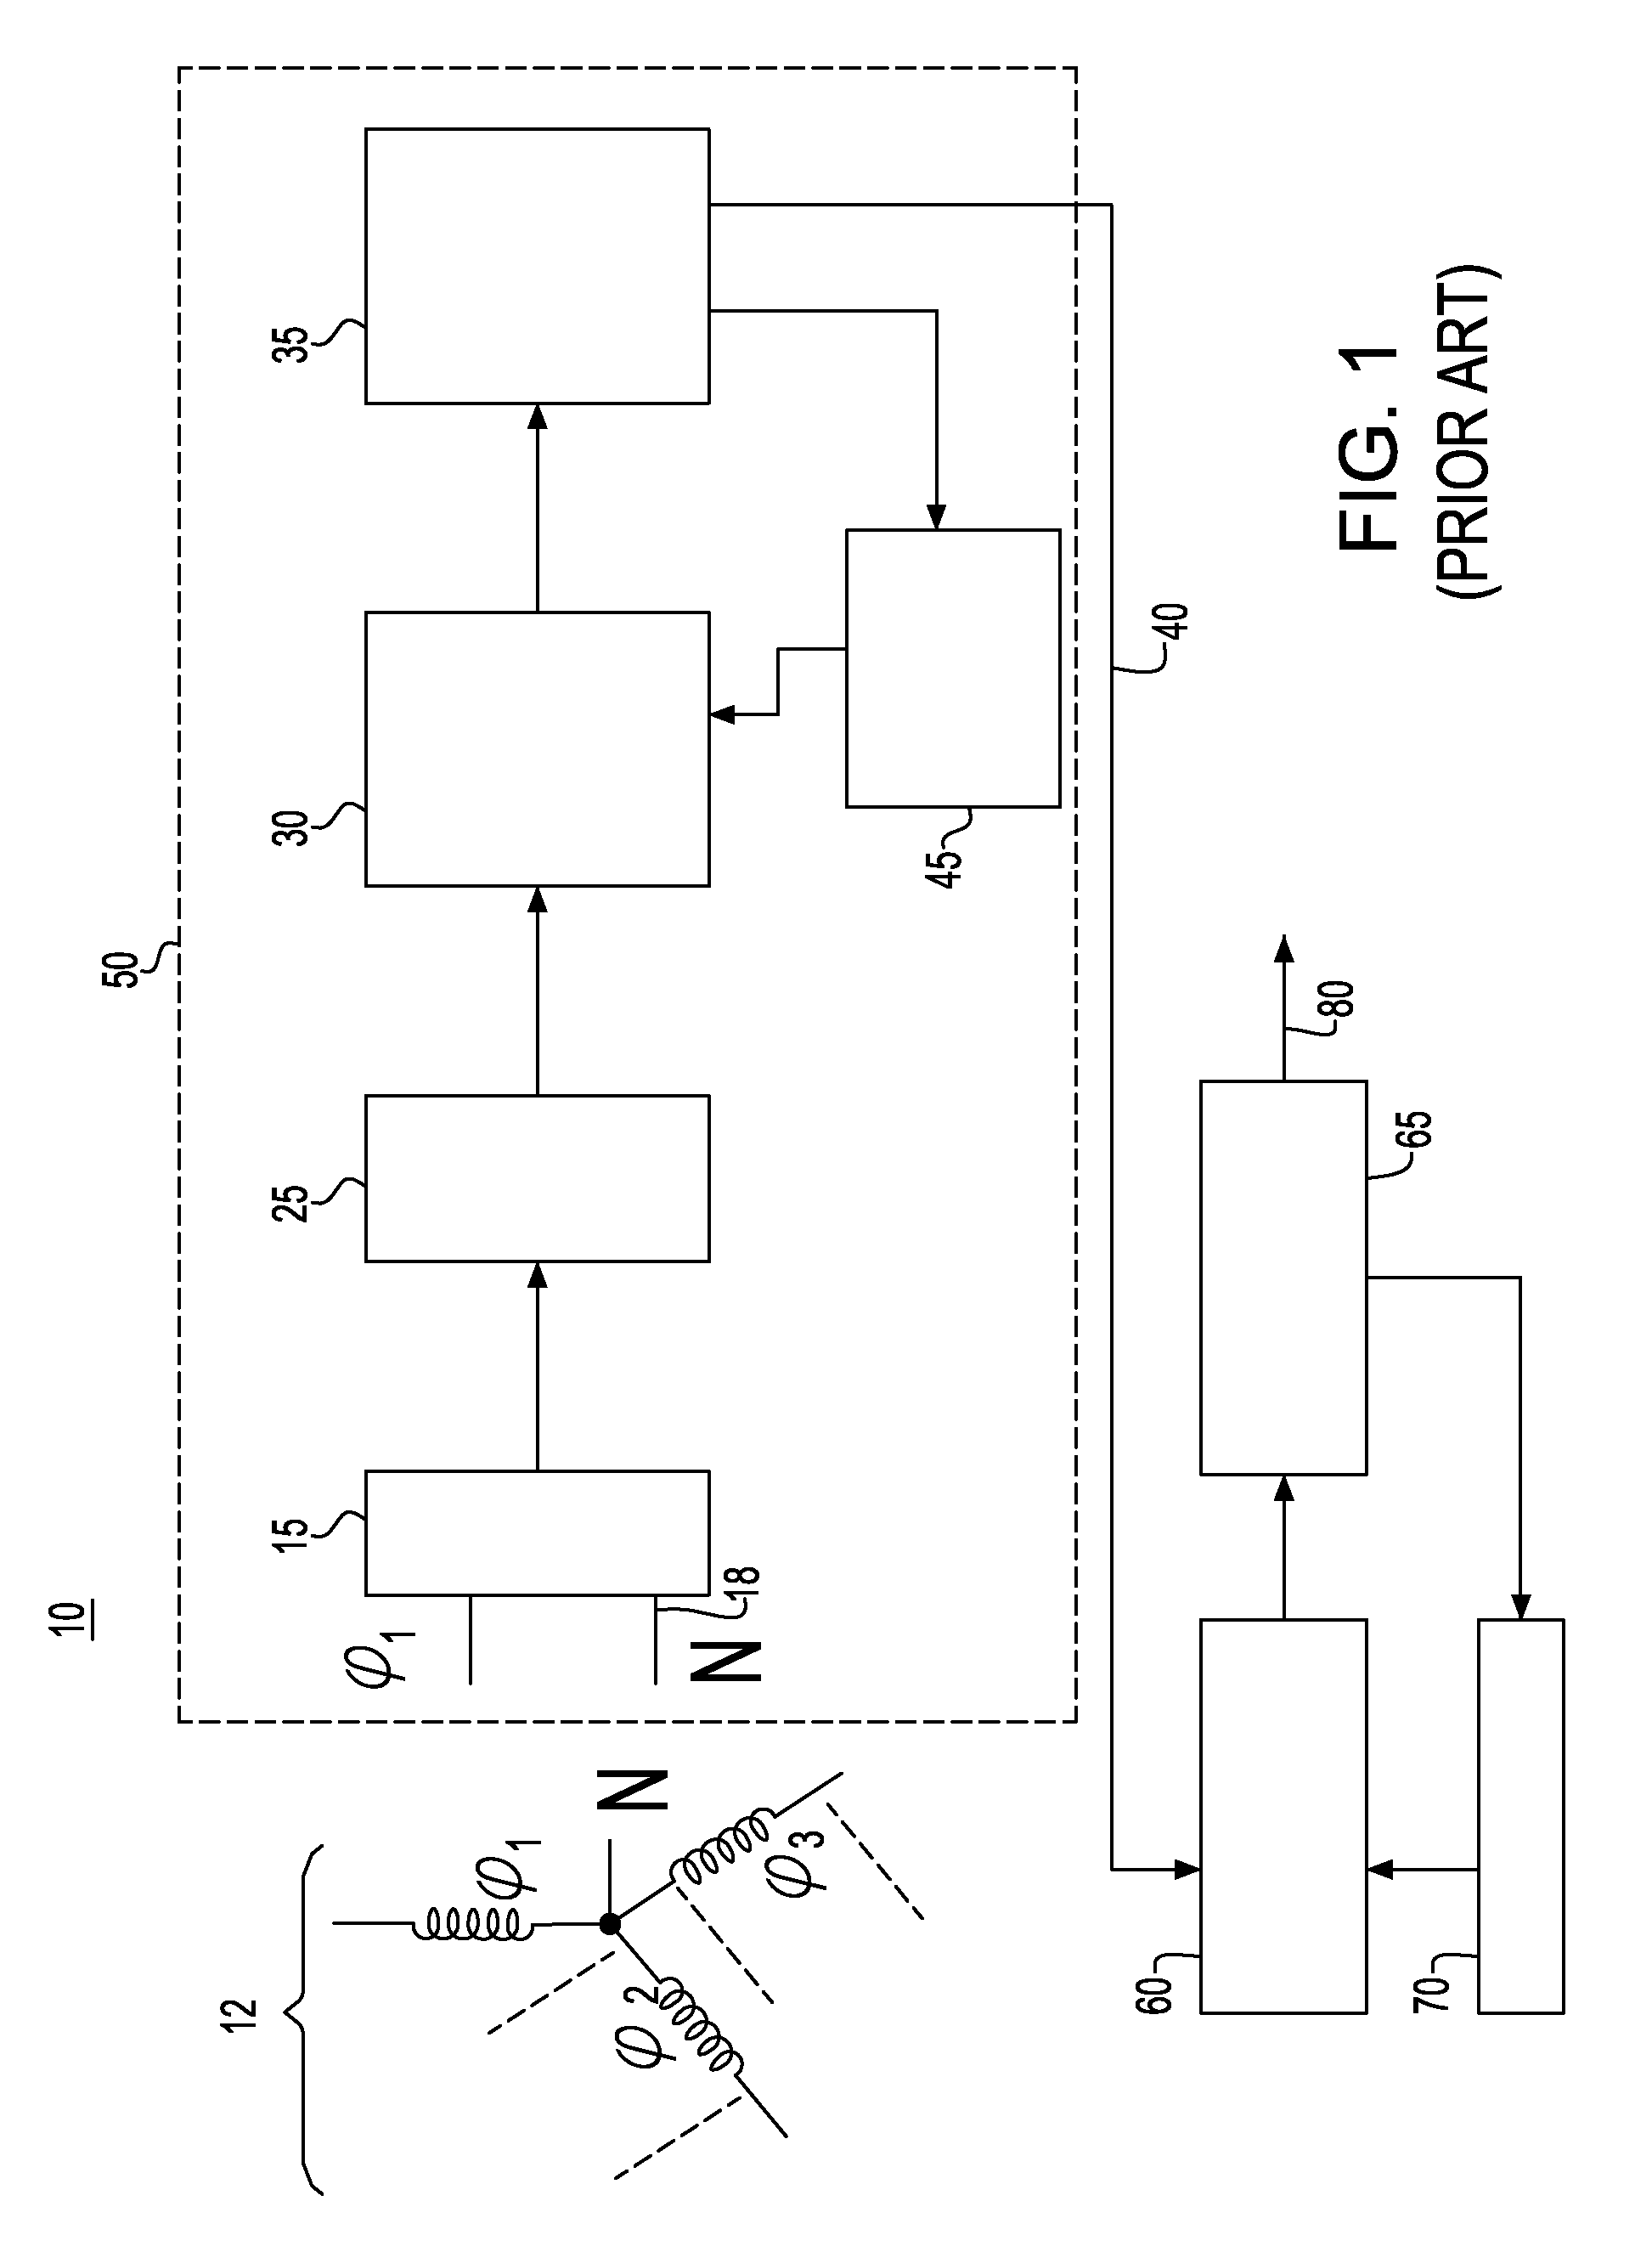 AC to DC power supply having zero frequency harmonic contents in 3-phase power-factor-corrected output ripple